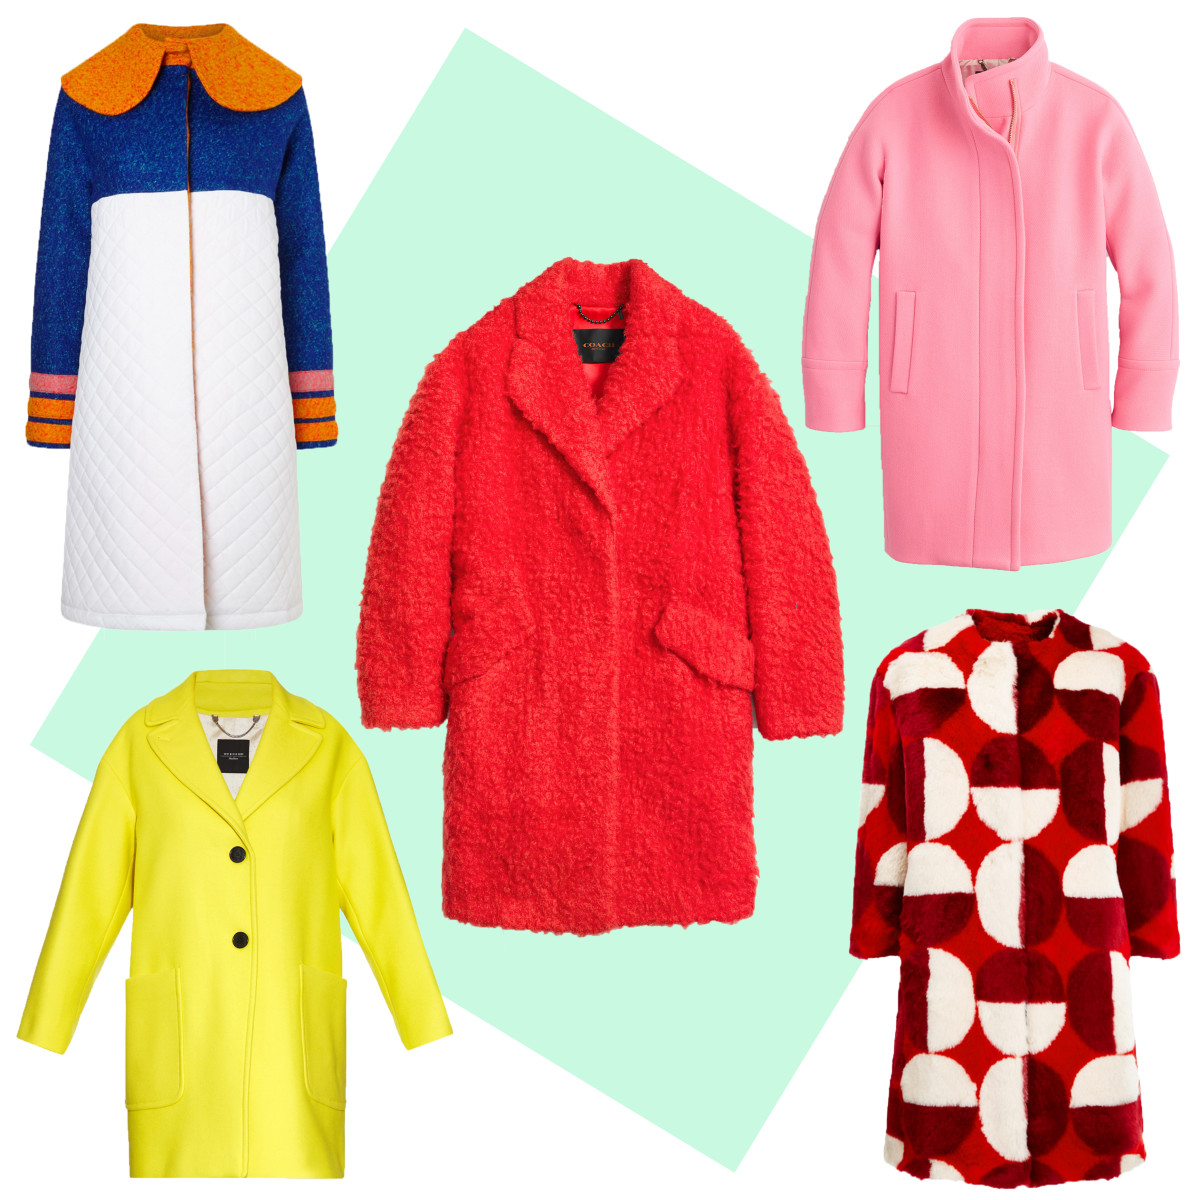 TOP LEFT: Anna K quilted collar coat, $580, available at Avenue32; CENTER: Coach fuzzy teddy bear coat, $795, available at Coach; TOP RIGHT: J.Crew stadium-cloth cocoon coat, $350, available at J.Crew; BOTTOM LEFT: Weekend Max Mara Afoso coat, $725, available at Matches Fashion; BOTTOM RIGHT: Ainea red faux fur coat, $585, available at Avenue32.